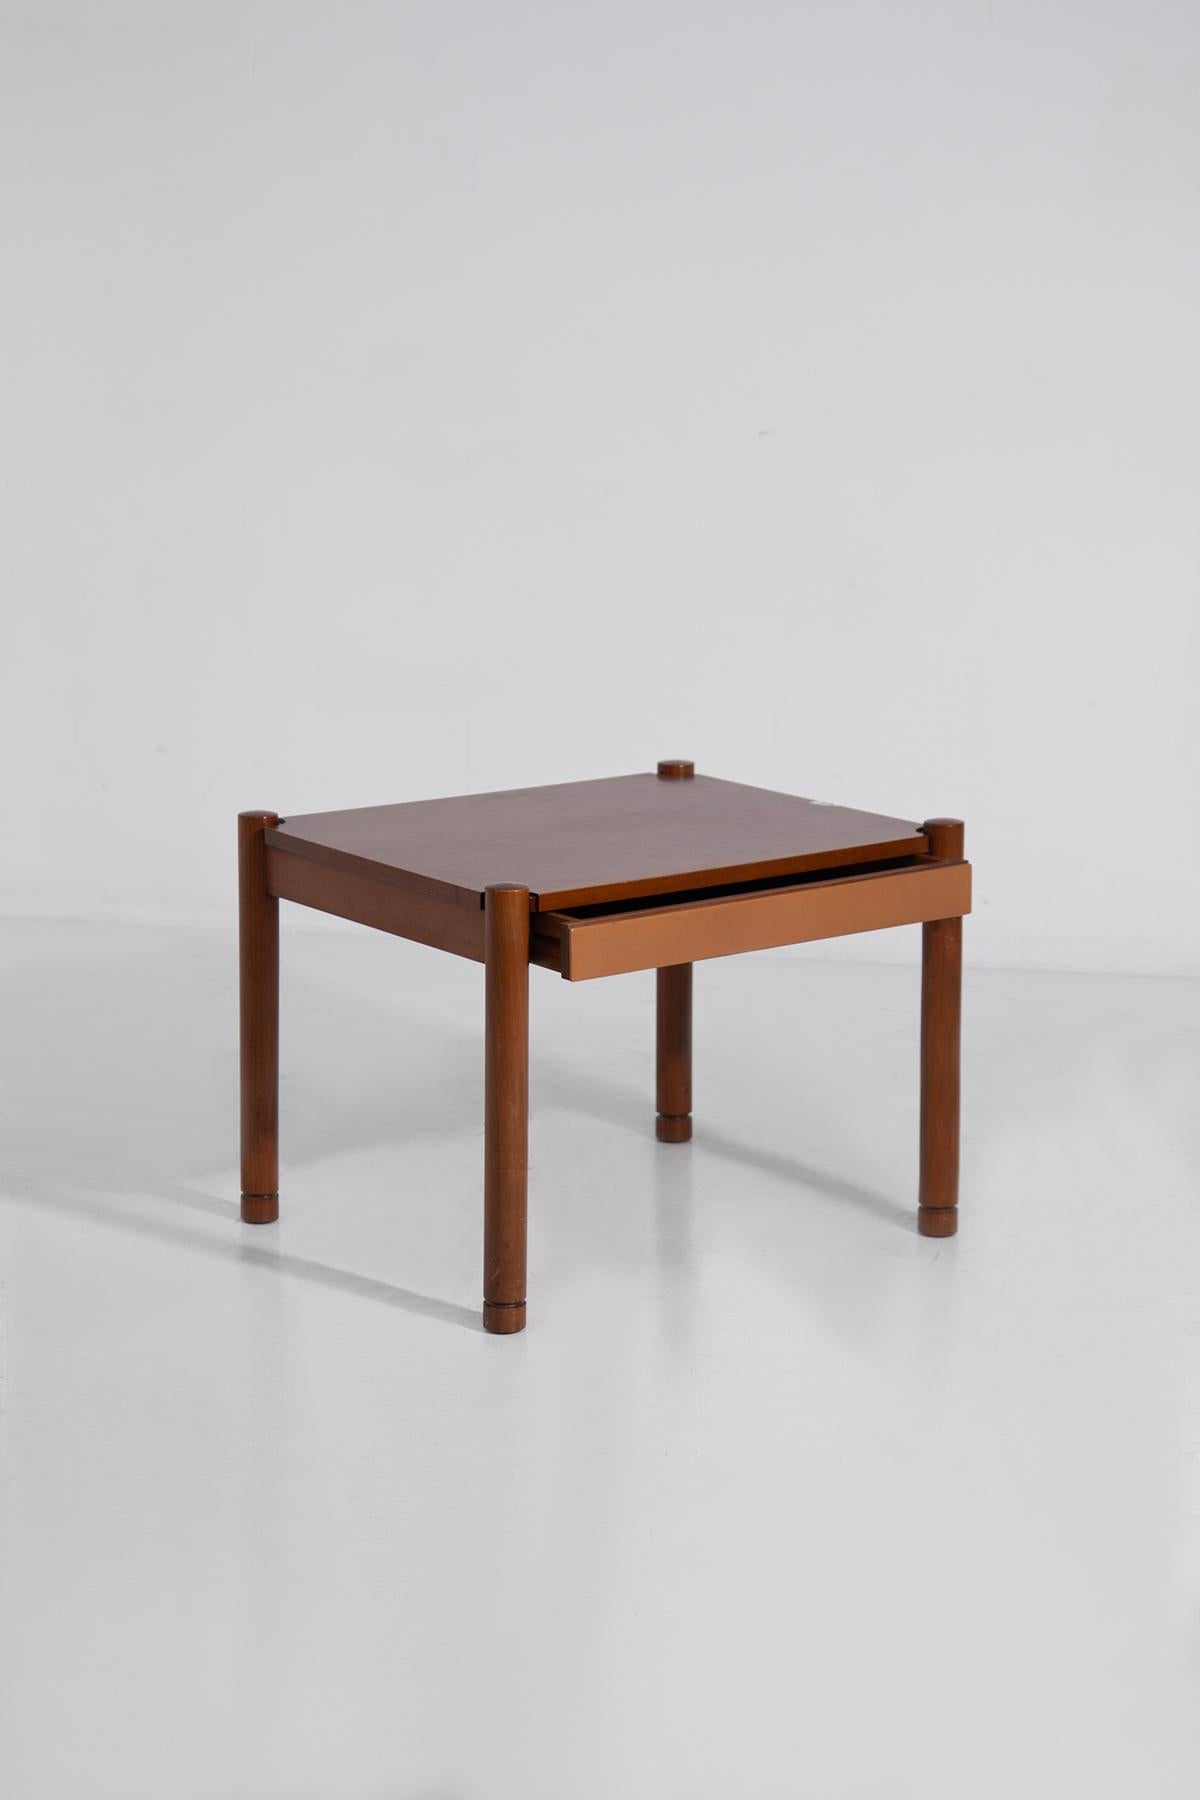 In the world of furniture design, some pieces stand out not only for their functionality but also for their timeless beauty. The Square Coffee Table by Eugenio Gerli For Borsani from the 1950s is one such masterpiece. Crafted with precision and an